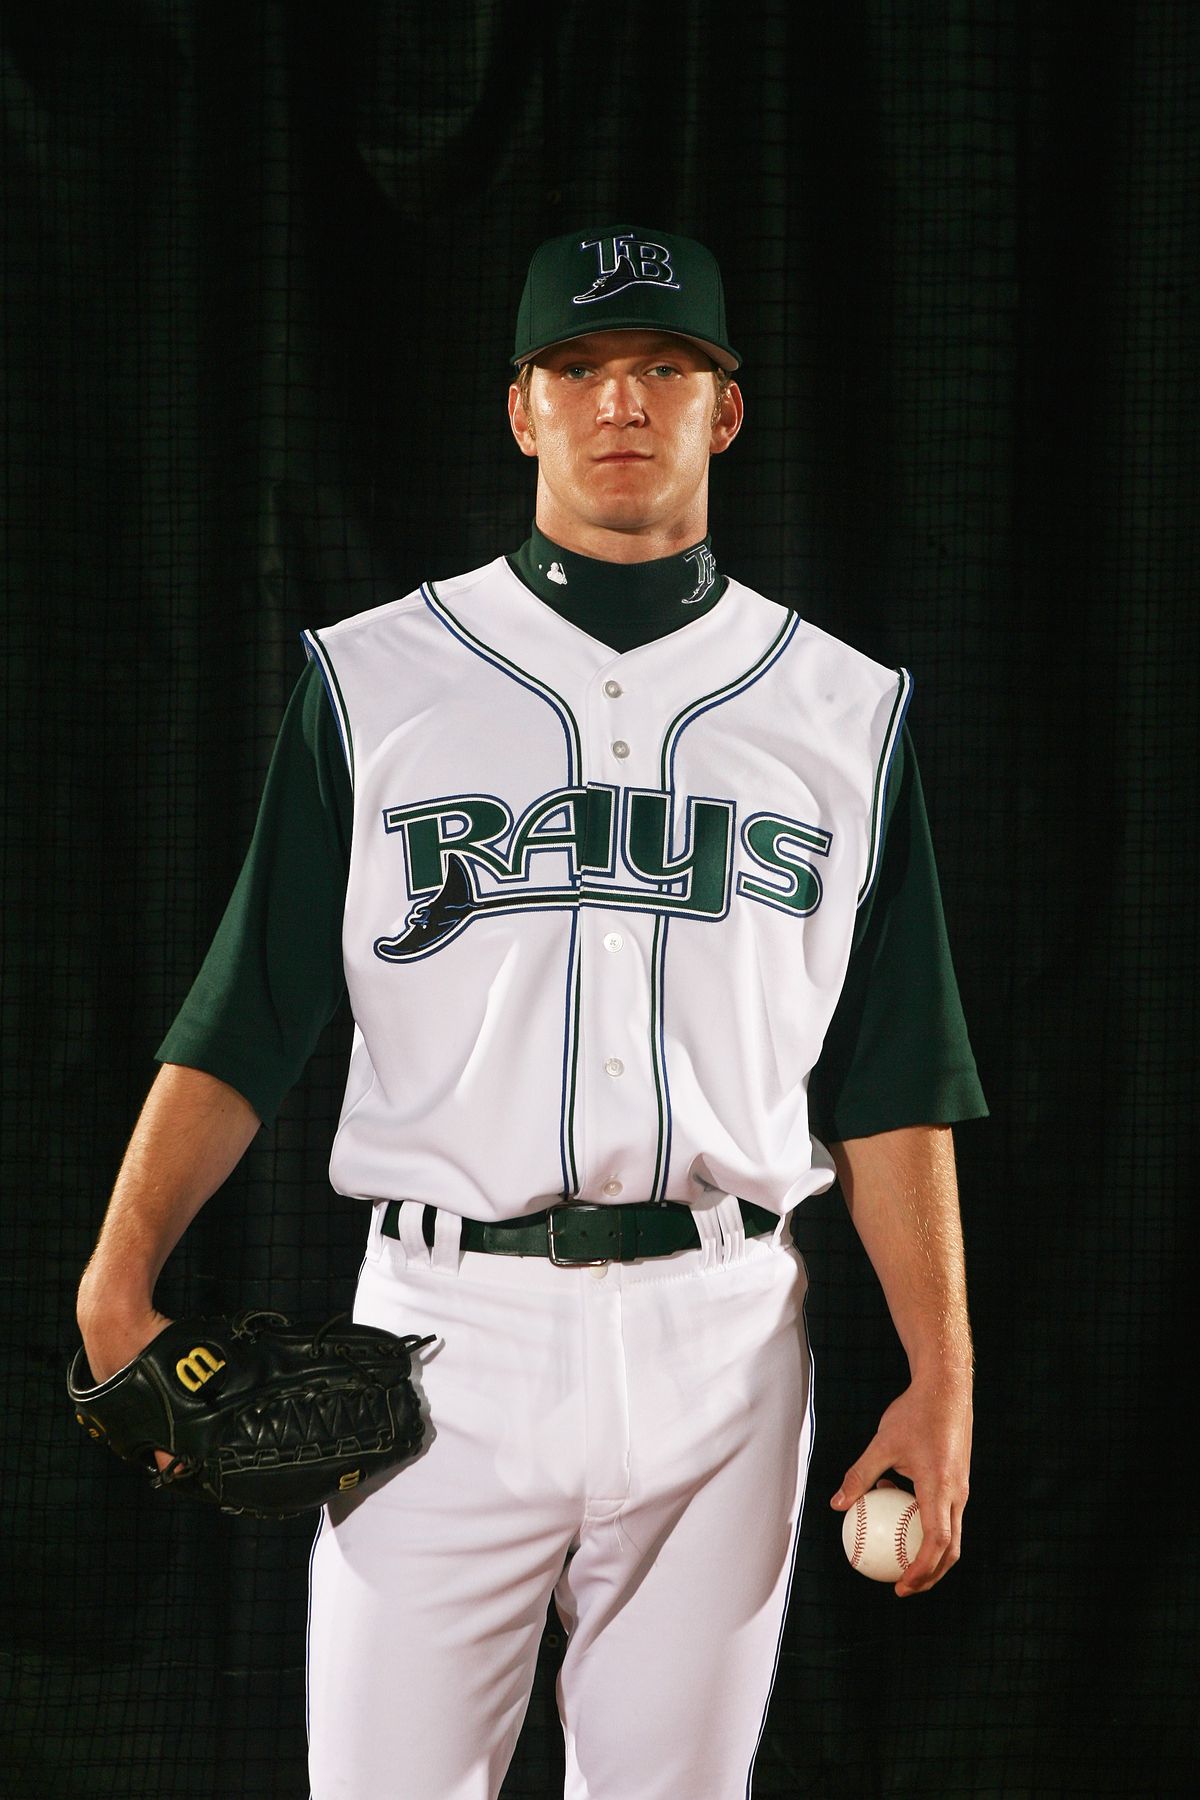 throwback tampa bay devil rays jersey